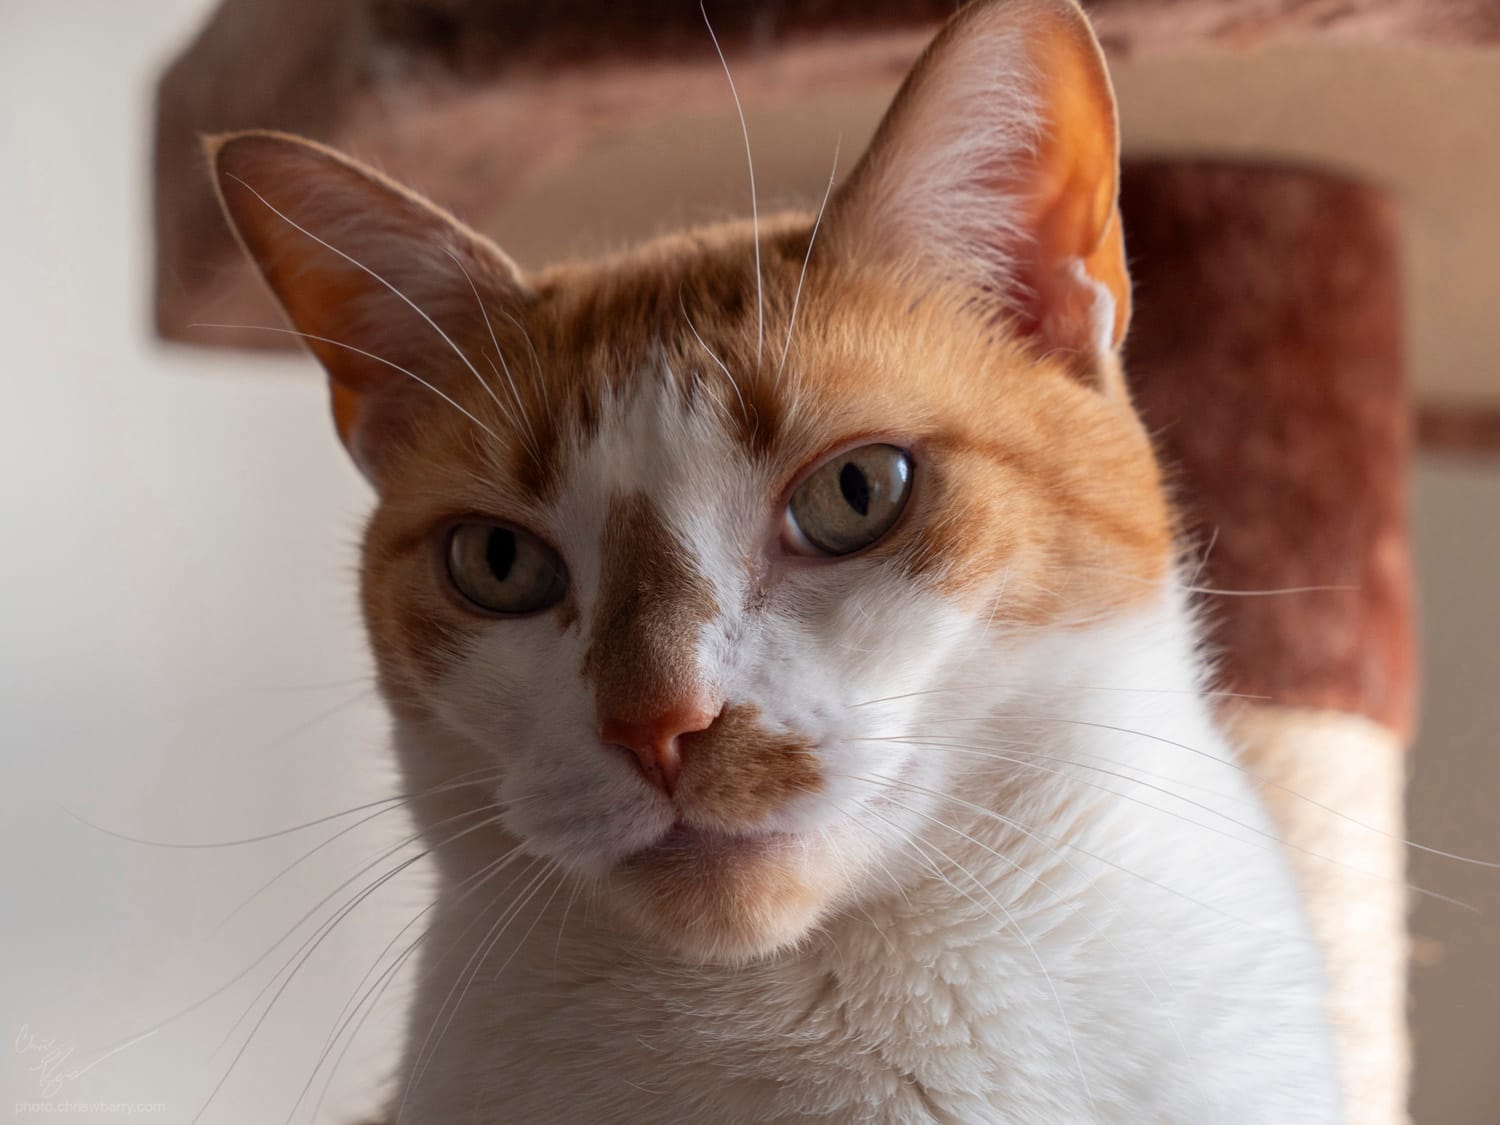 Headshot of orange and white cat. His head is slightly tilted towards the left of the frame